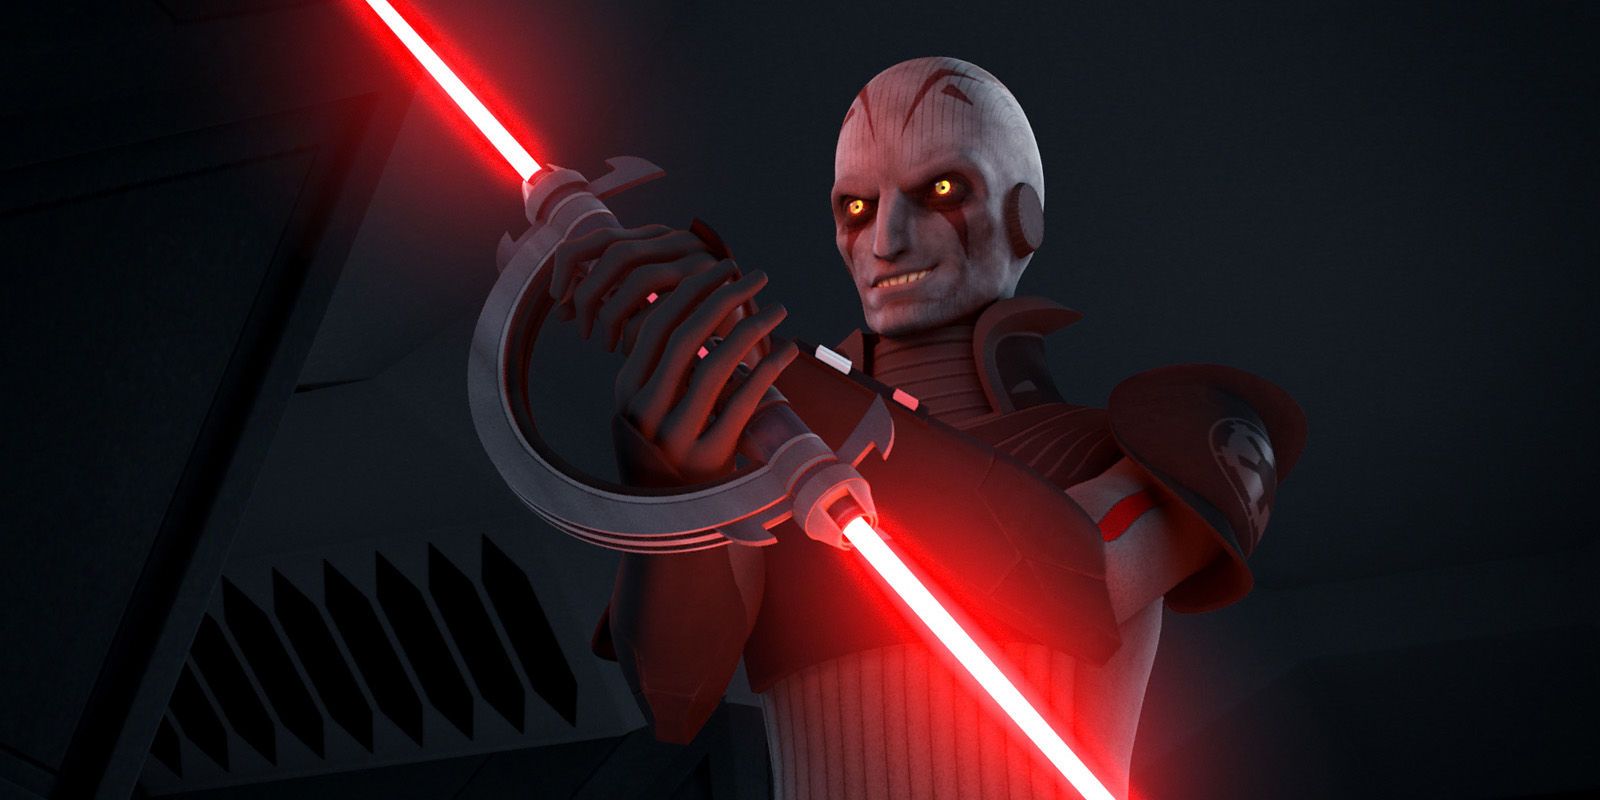 The Grand Inquisitor in Rebels.